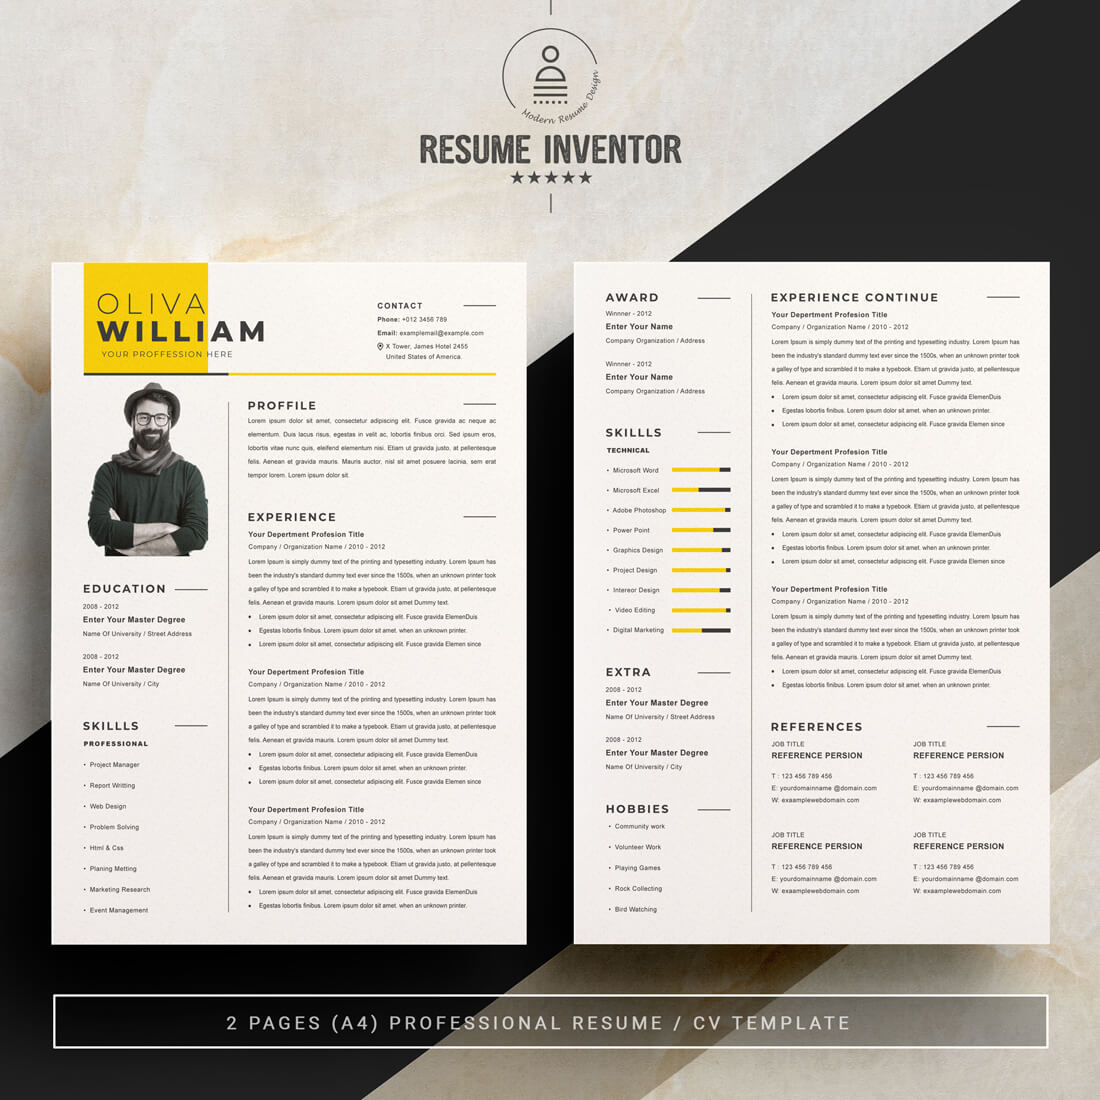 Modern Resume Template | Professional CV Template | Pages preview image.